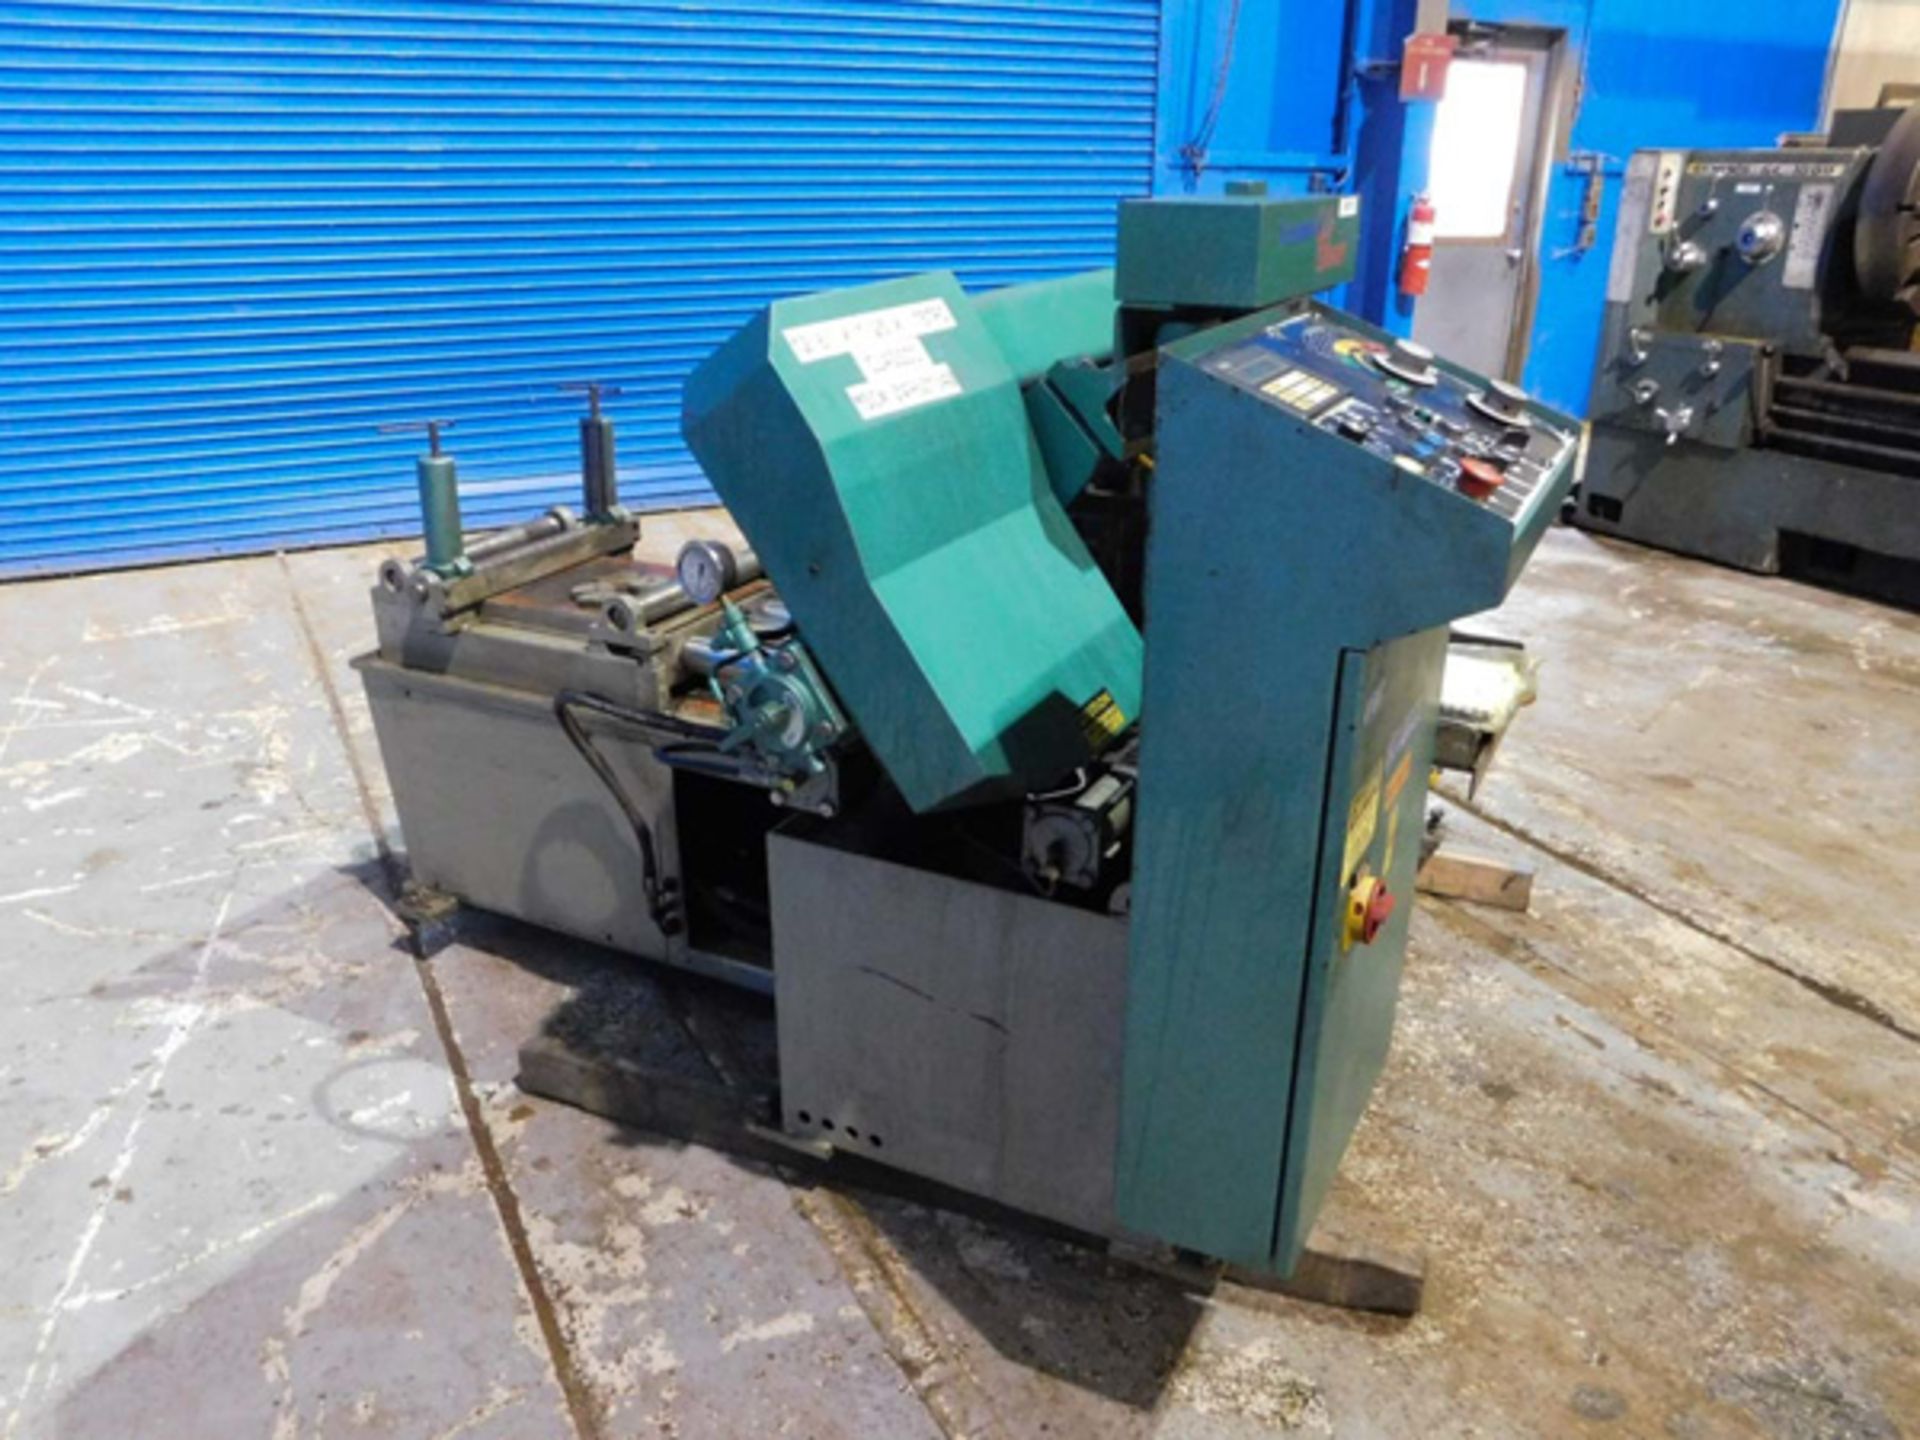 2005 Peerless Automatic Horizontal Band Saw, 12" x 13.4" - Mdl: HB1212NC - S/N: C941269 - Location - Image 10 of 12